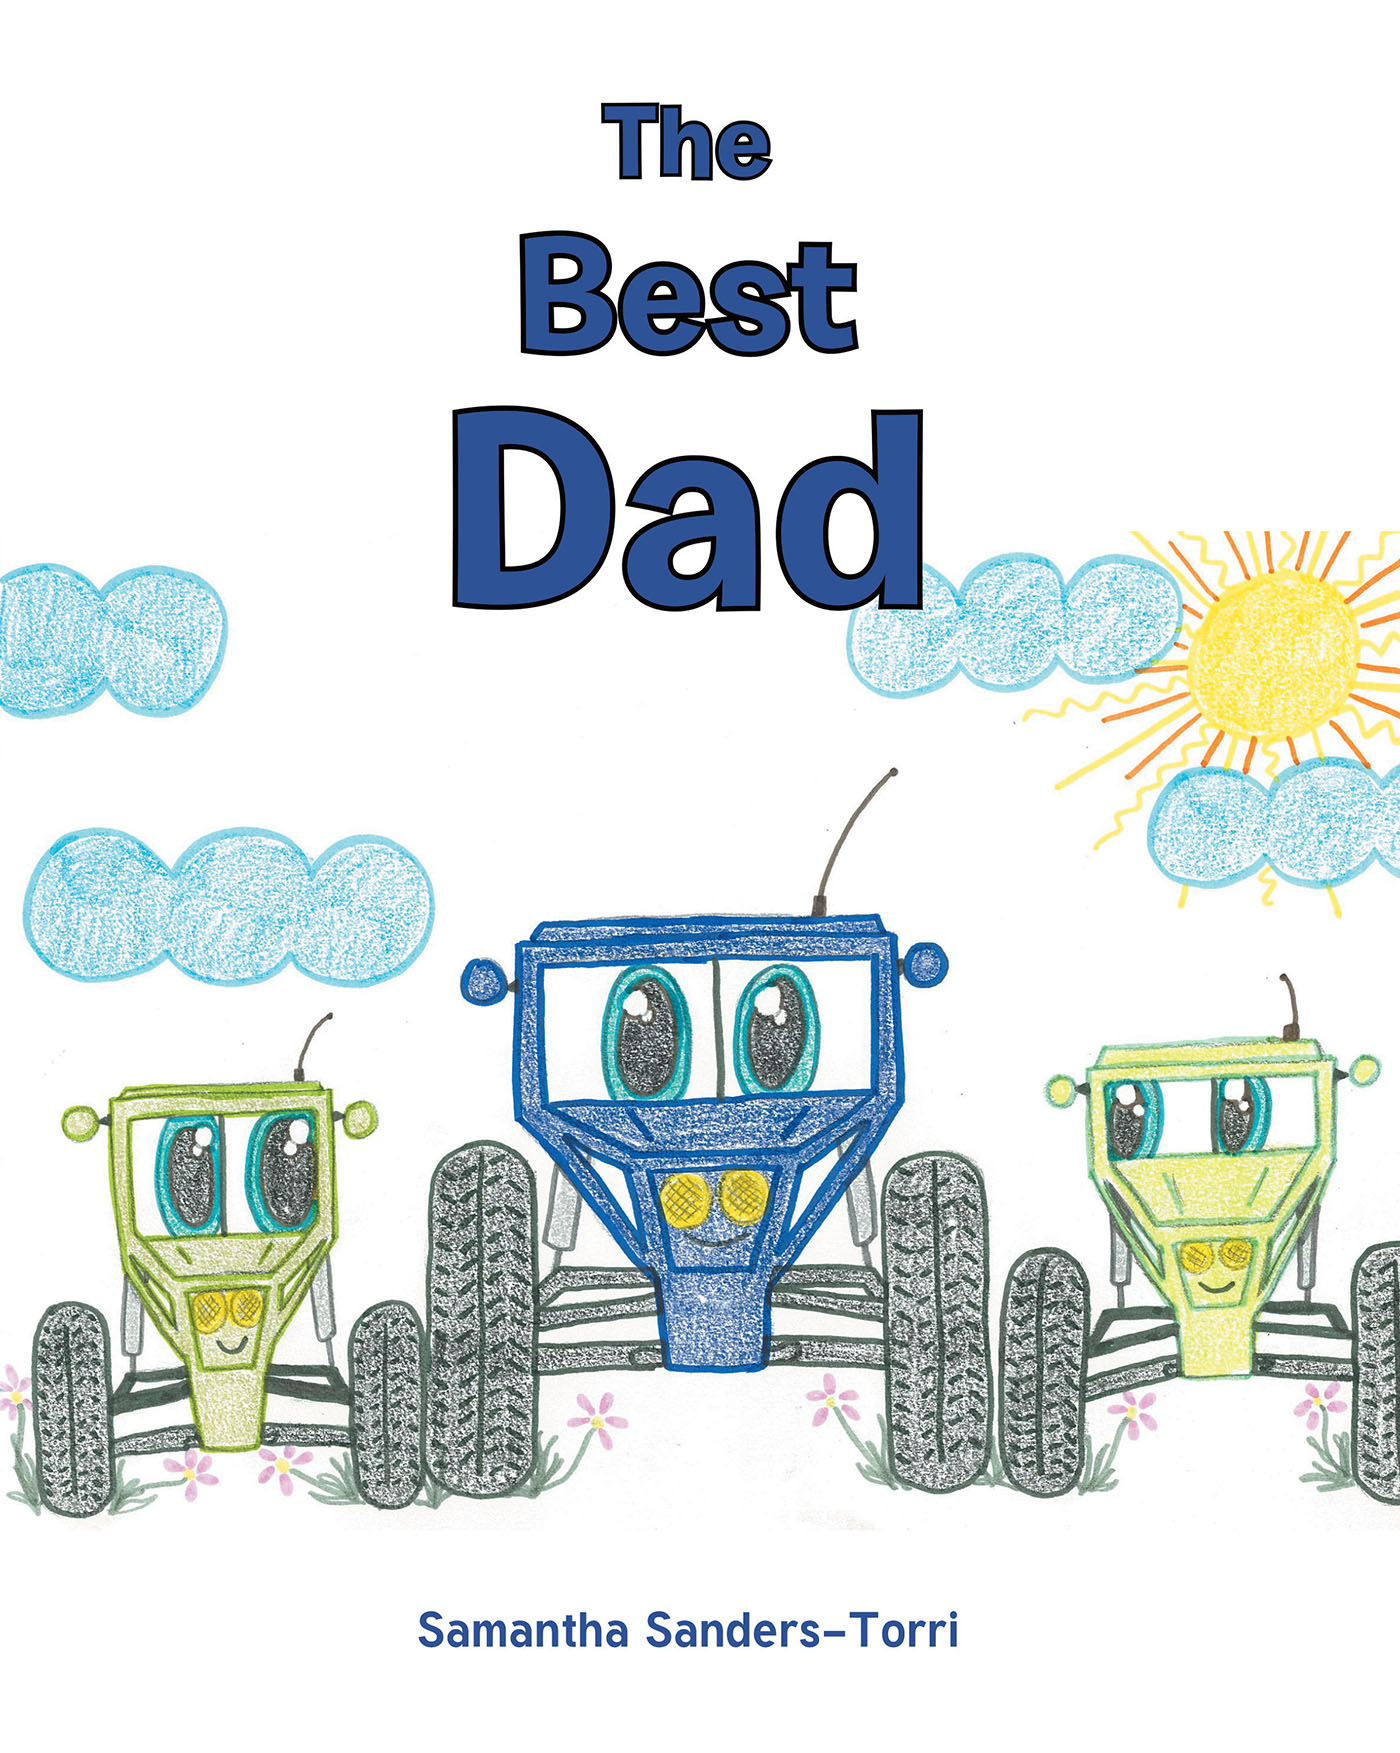 Samantha Sanders-Torri’s New Book, "The Best Dad," Follows the Exciting Story of Two Brothers Whose Father Always Ensure They Are Safe Through All of Life's Rocky Moments